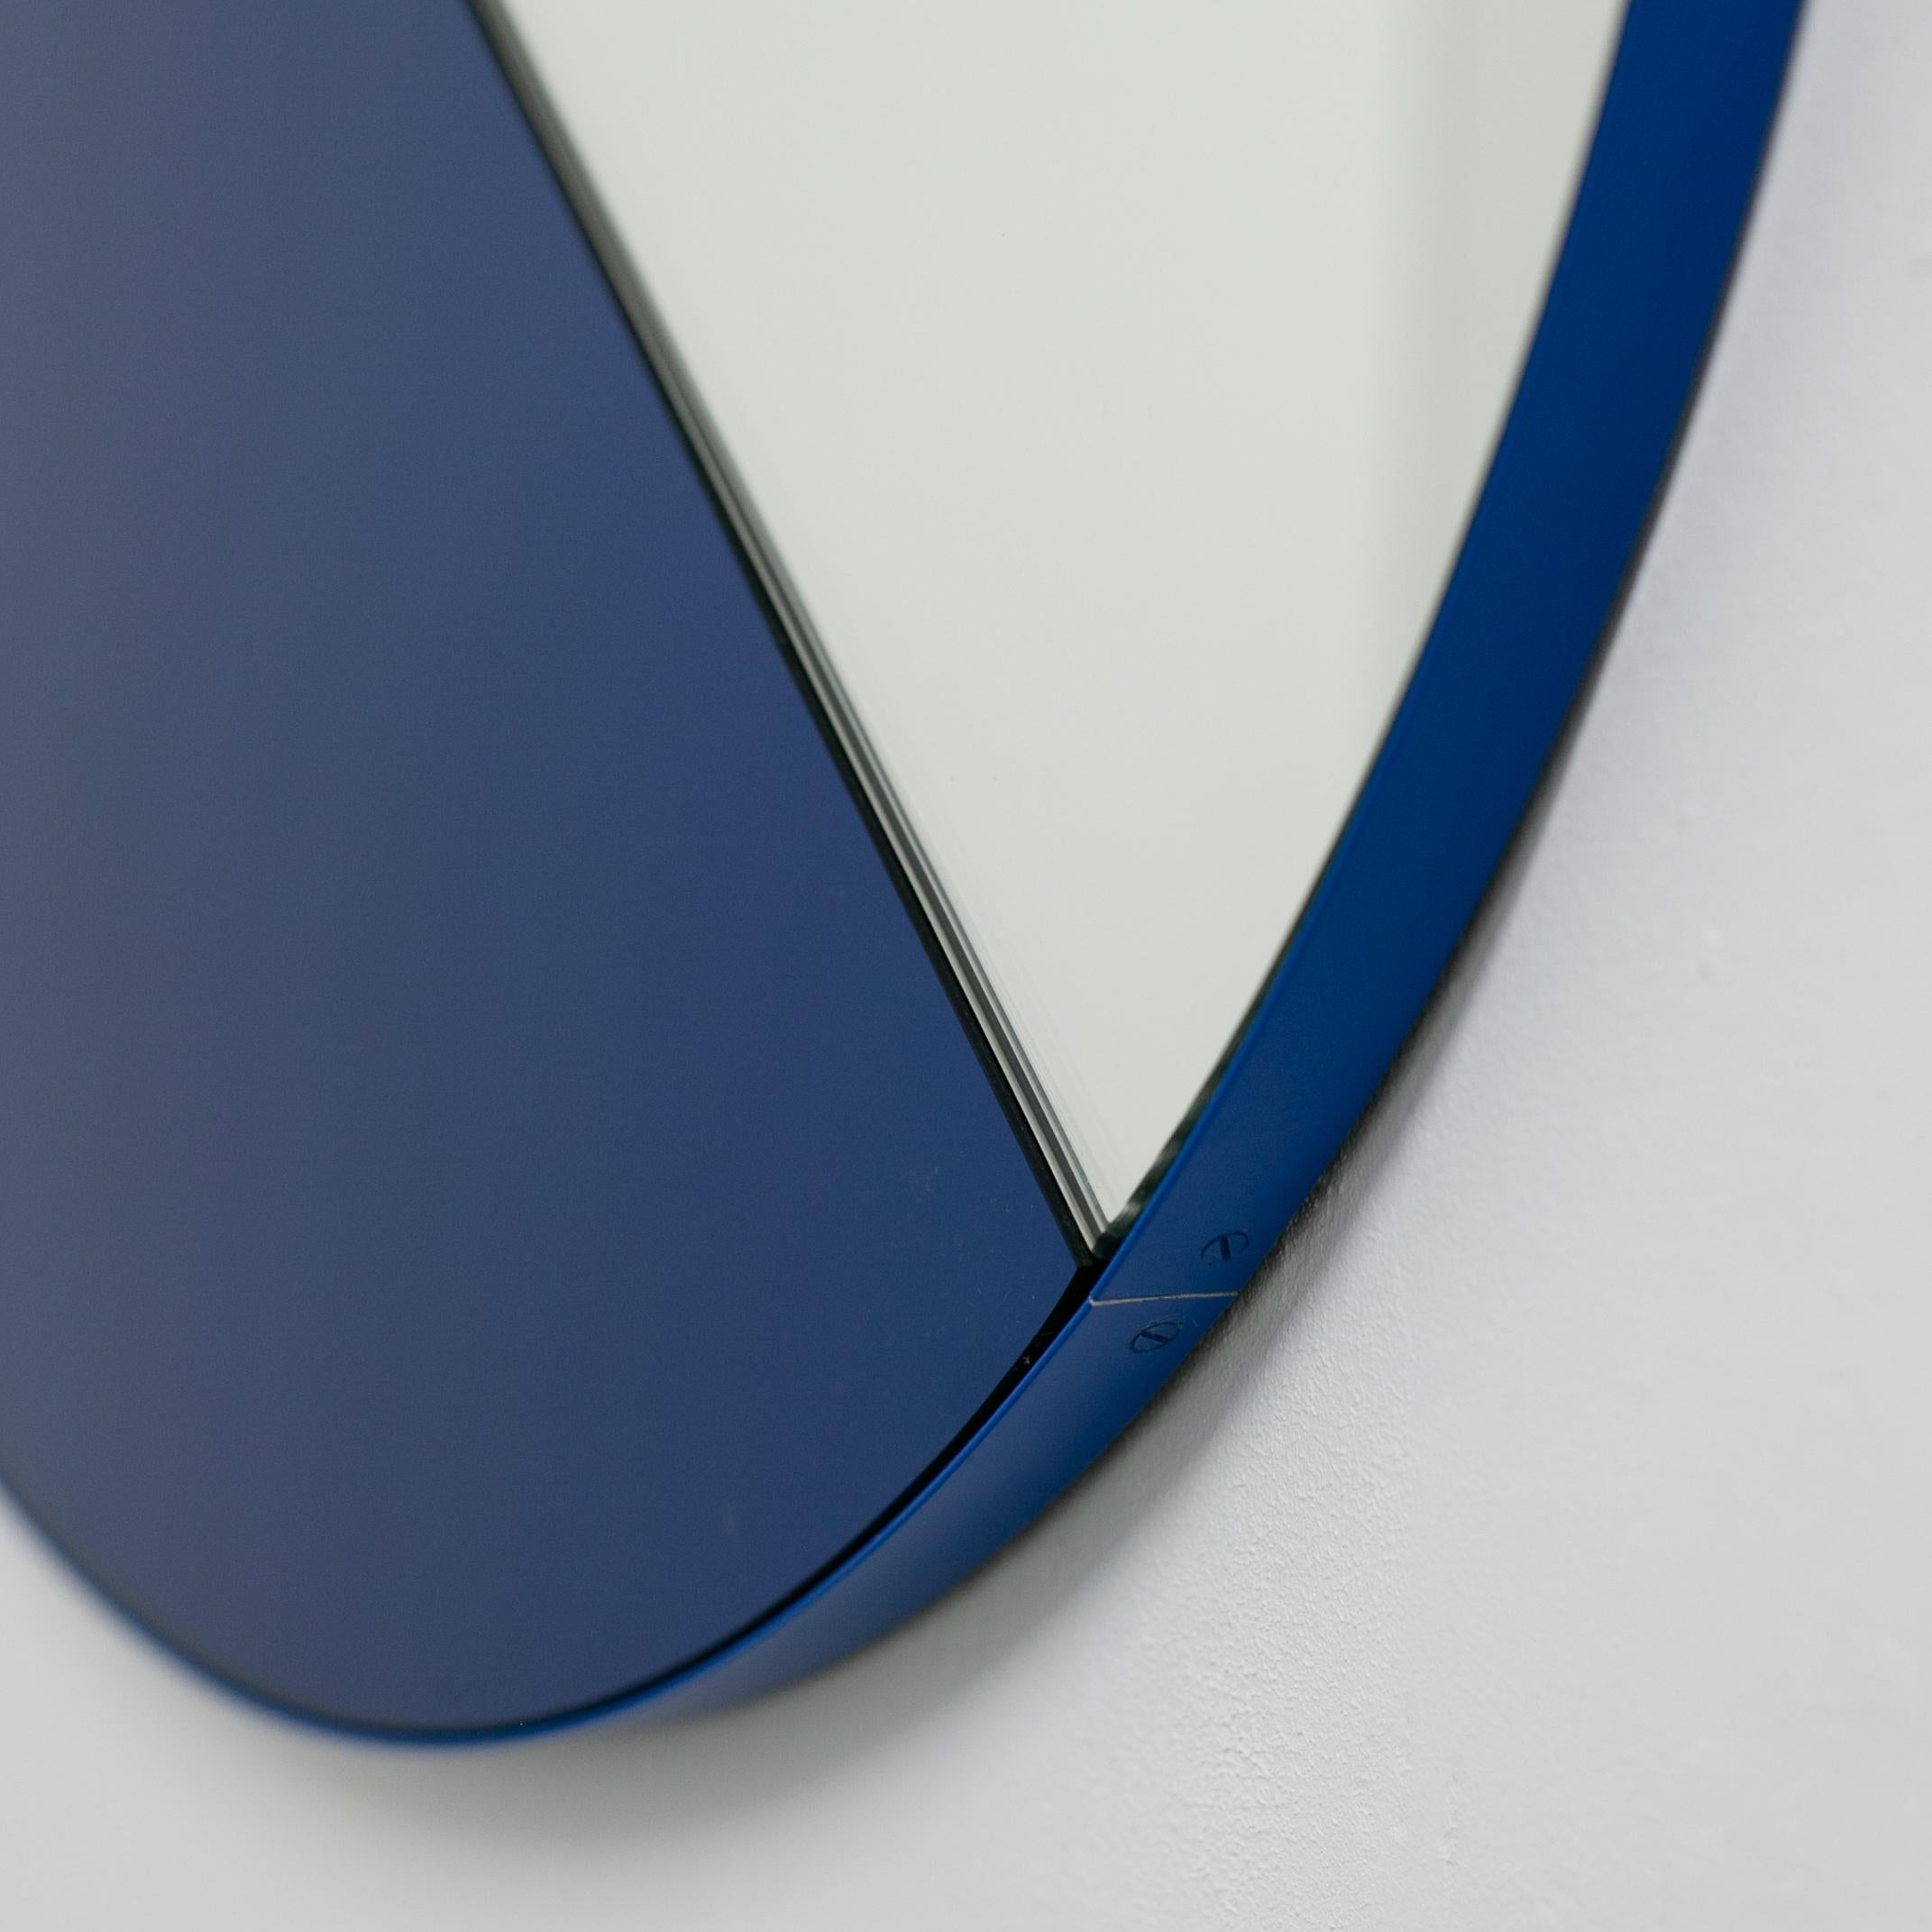 Orbis Dualis Contemporary Blue and Silver Round Mirror with Blue Frame, Large For Sale 2